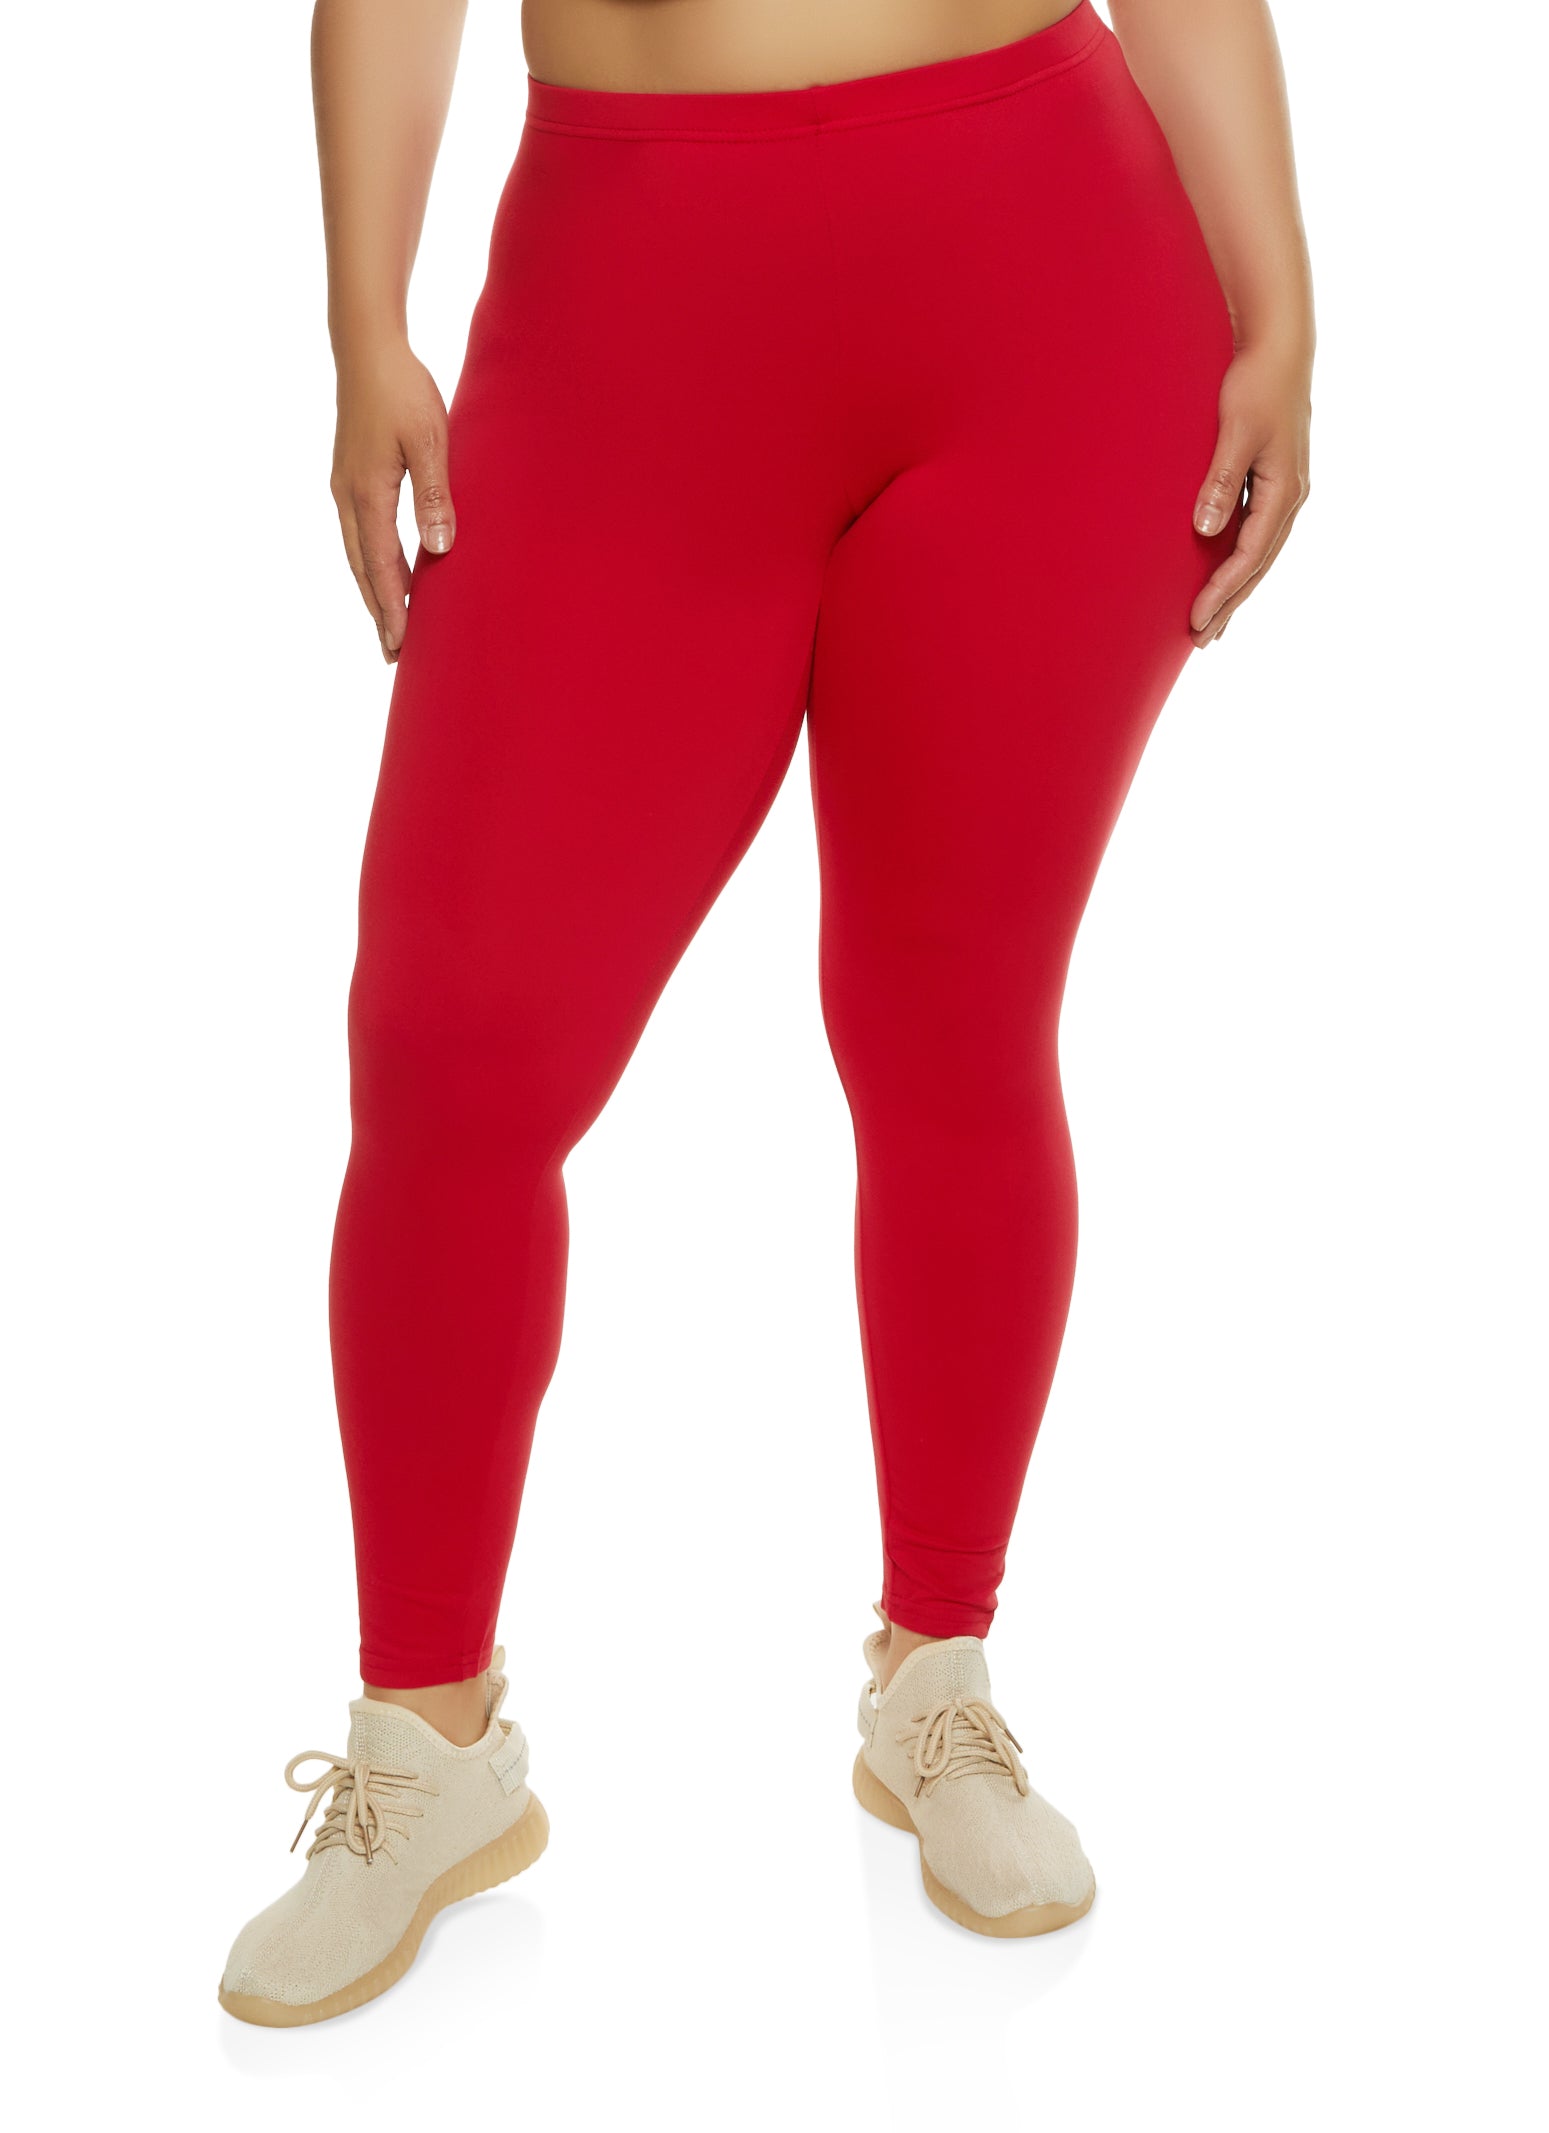 Plus Size Red Leggings, Everyday Low Prices